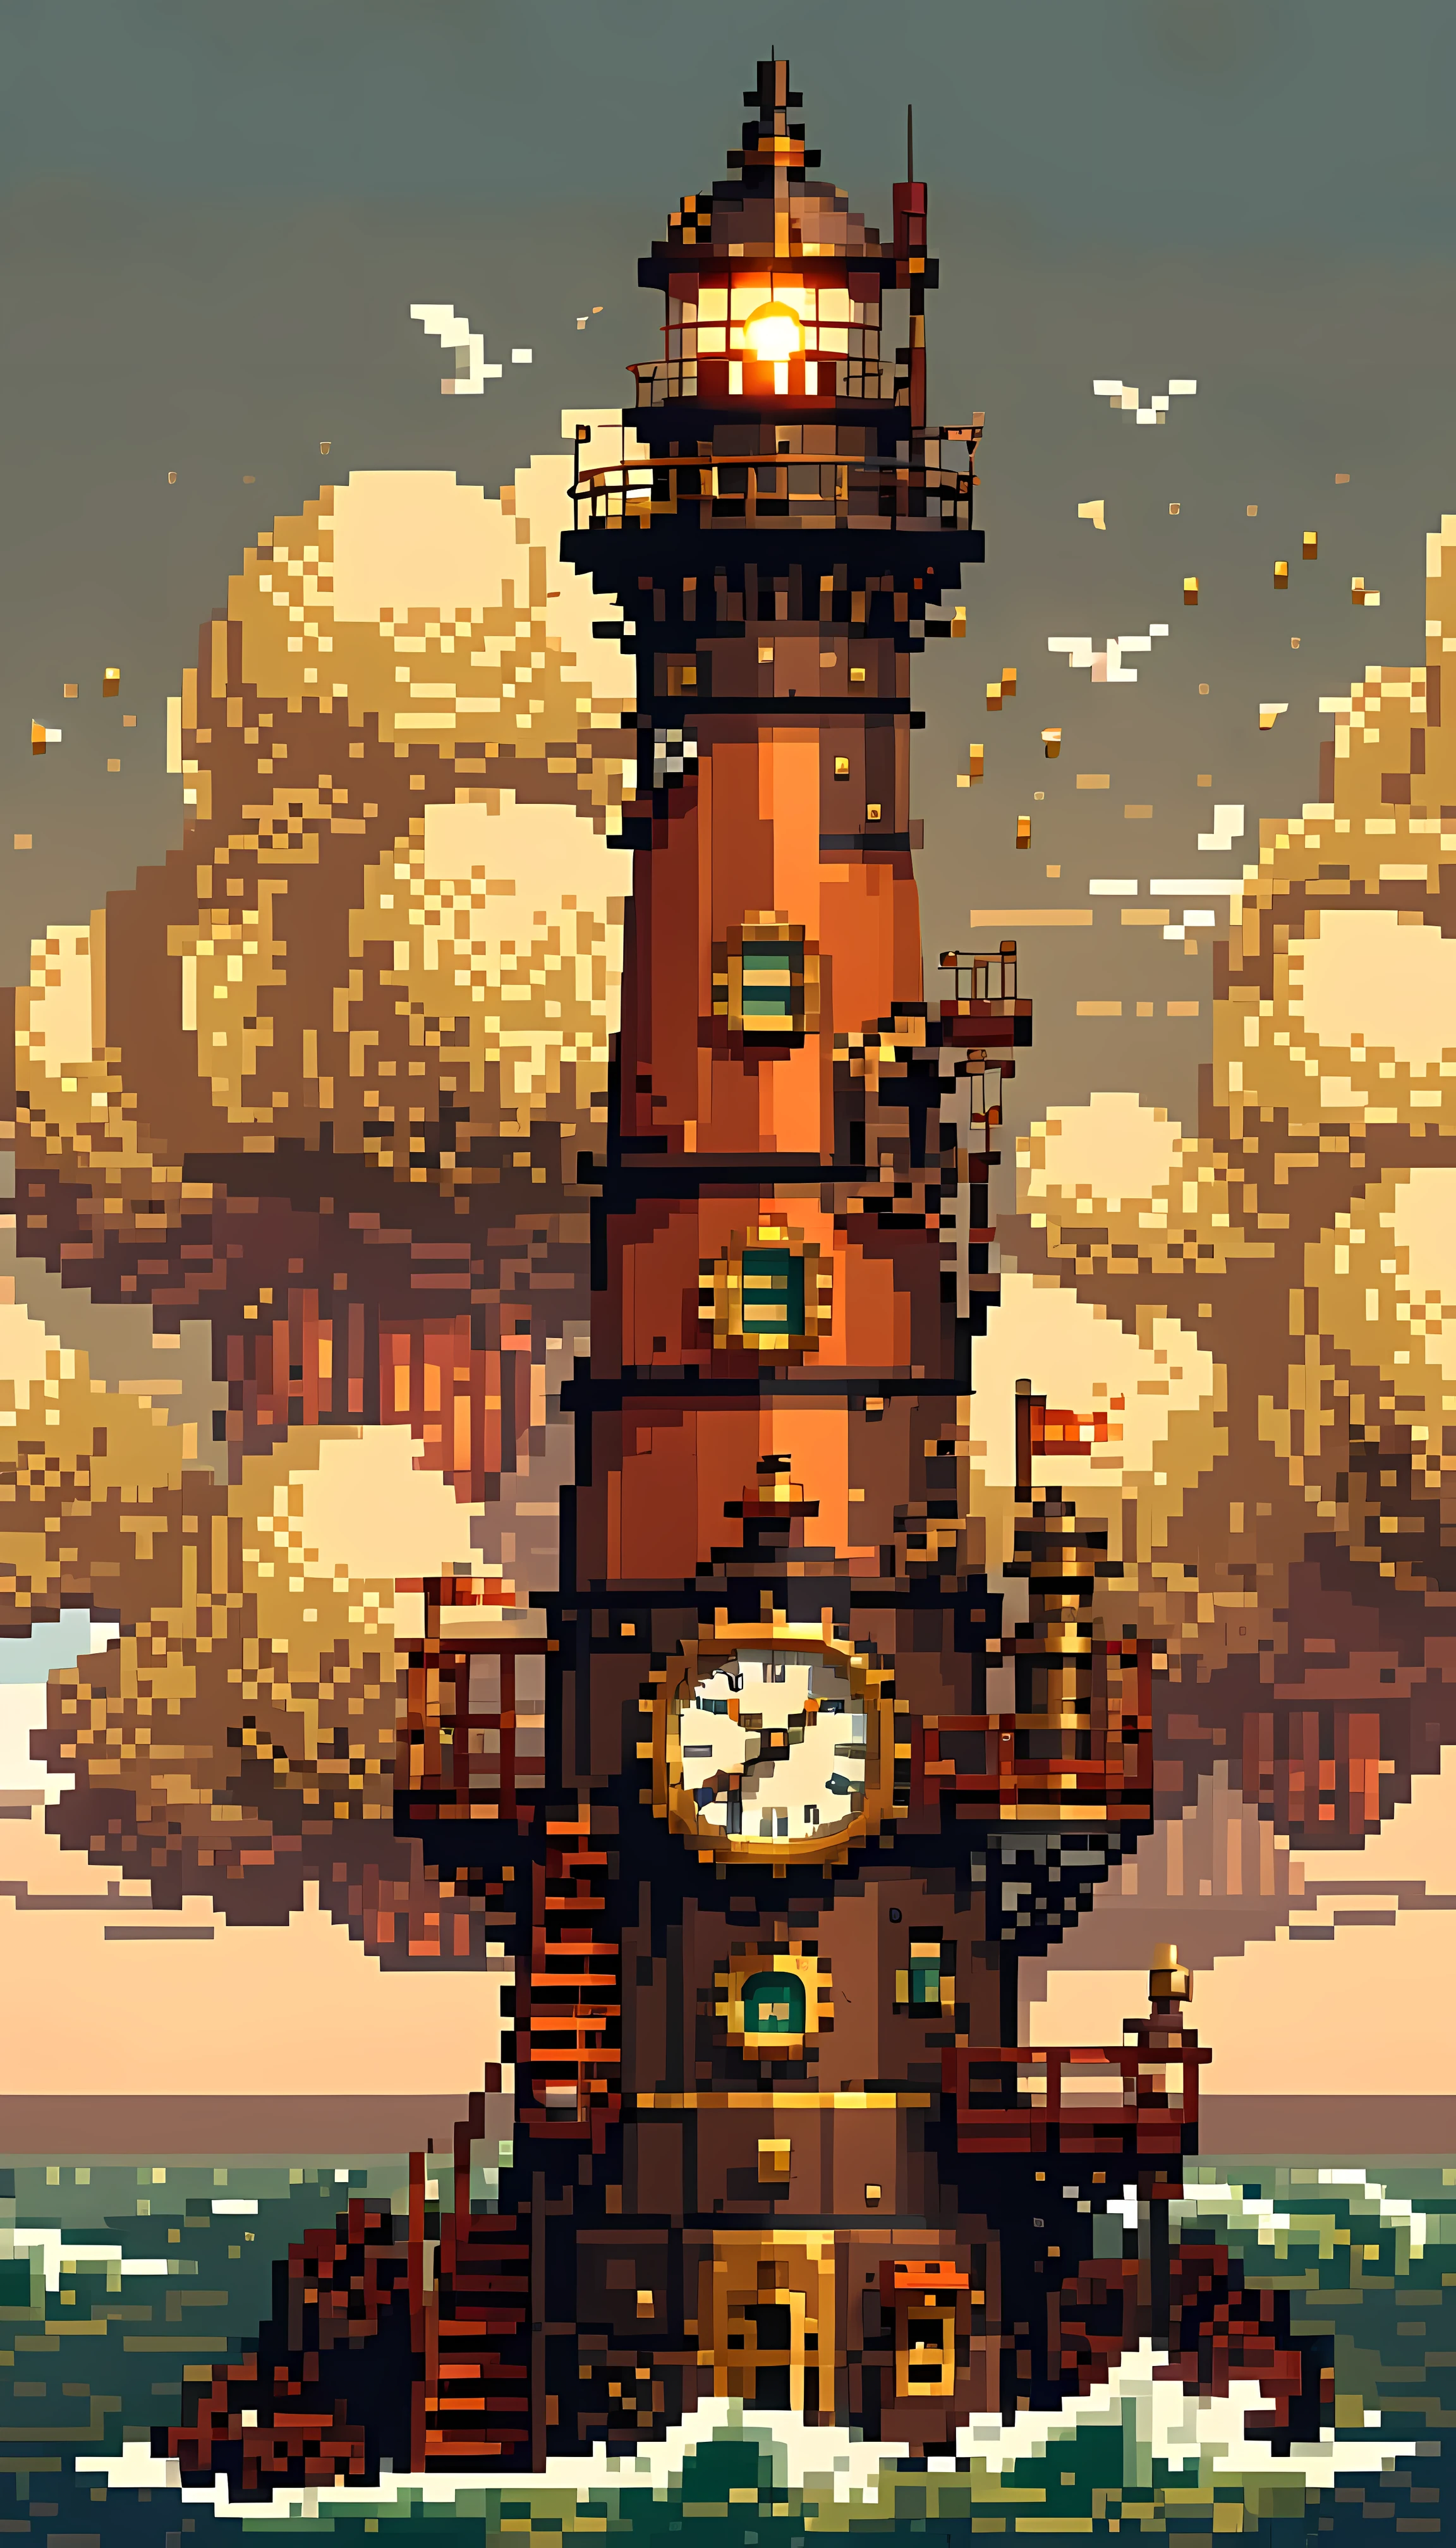 Pixel art, masterpiece in maximum 16K resolution, superb quality, a steampunk lighthouse featuring a towering structure with brass and copper elements, intricate clockwork mechanisms, warm glowing light, billowing steam clouds, nautical touches, and a weathered look, rich metallic color palette, fine linework and embellishments, retro-futuristic design. | ((More_Detail))